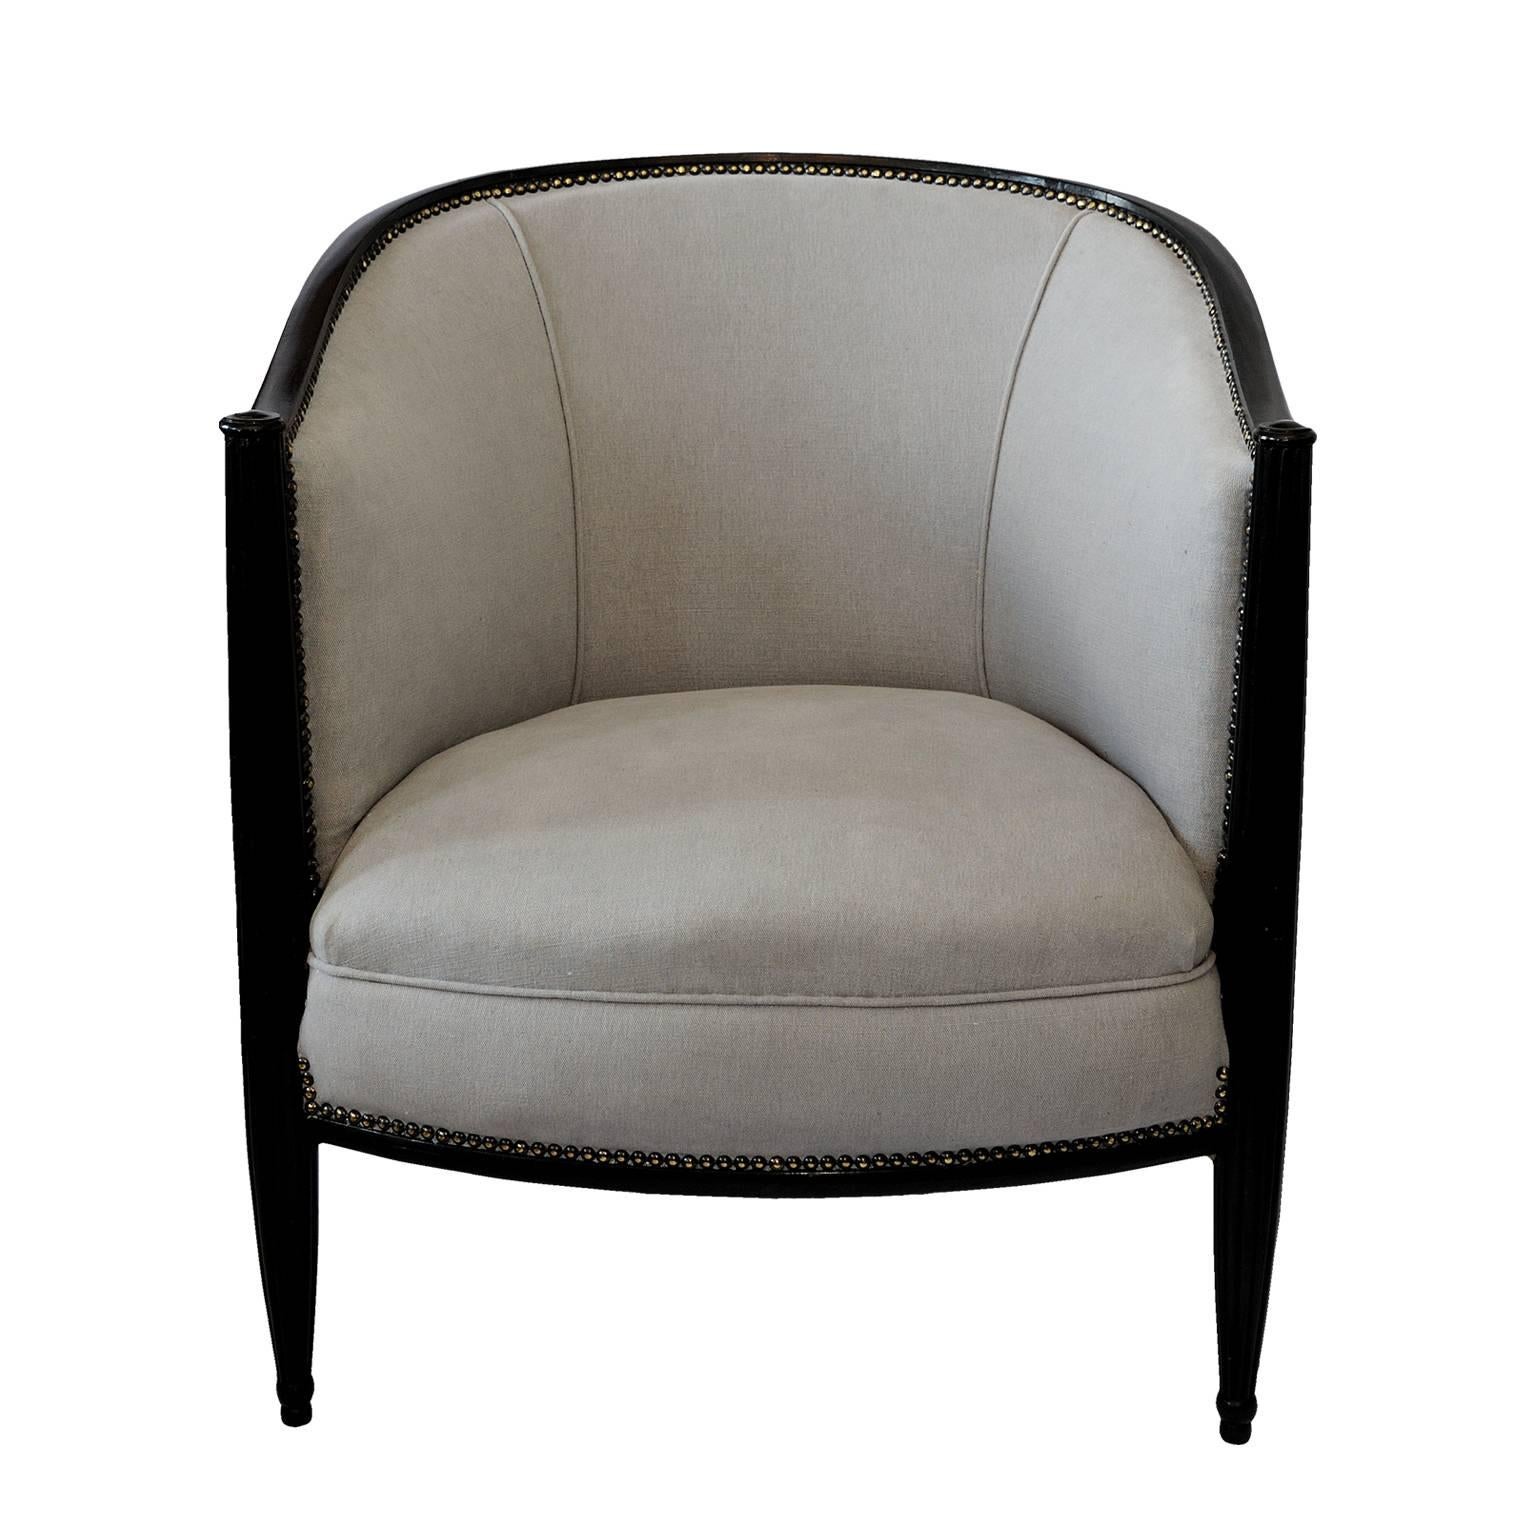 This is a wonderful, very comfortable and stylish French Art Deco ebonized Tub chair, now upholstered in a very smart light grey Scottish linen, circa 1930.